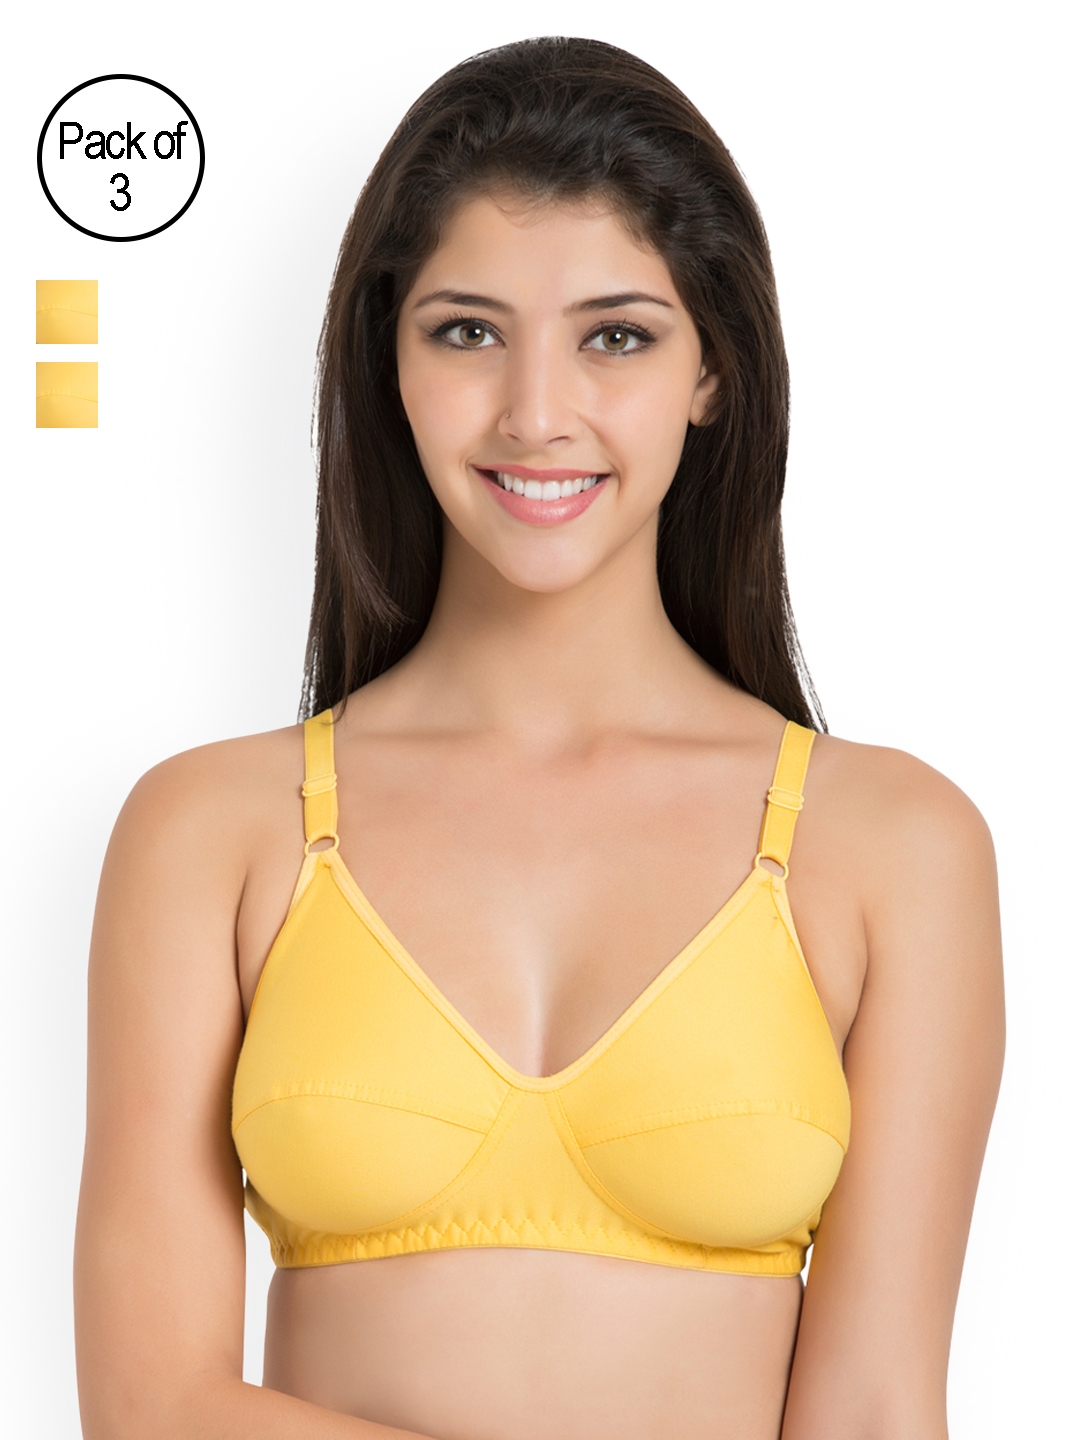 Buy Souminie Pack Of 3 Non Padded Soft Fit Bras - Bra for Women